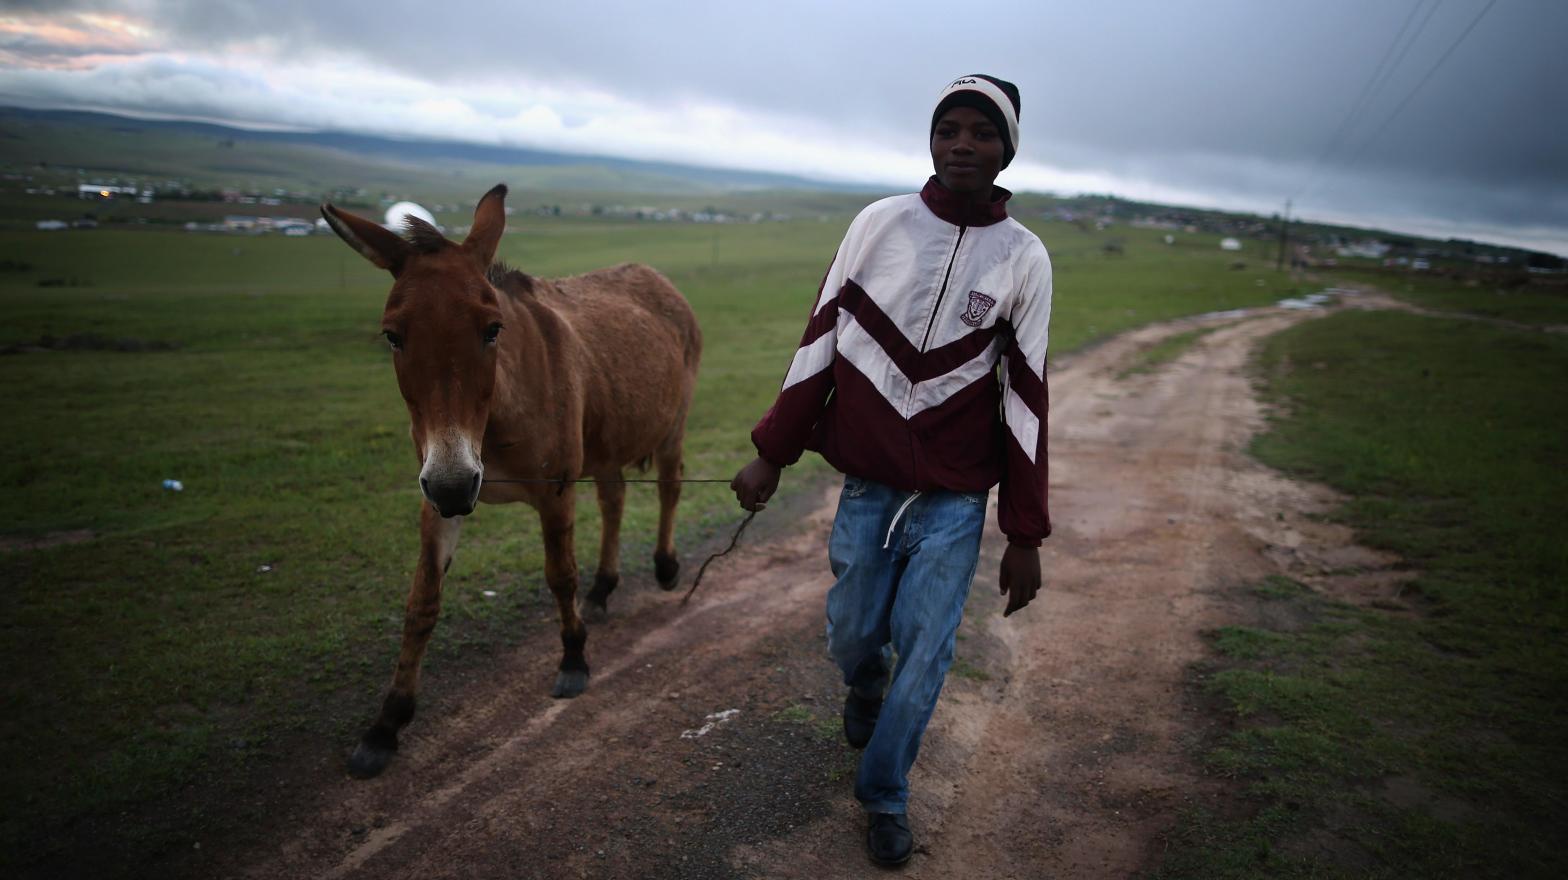 Donkeys are a main source of labour in countries like rural South Africa, but the cruel 'ejiao' trade has decimated donkey populations in many places that depend on them. (Photo: Dan Kitwood, Getty Images)